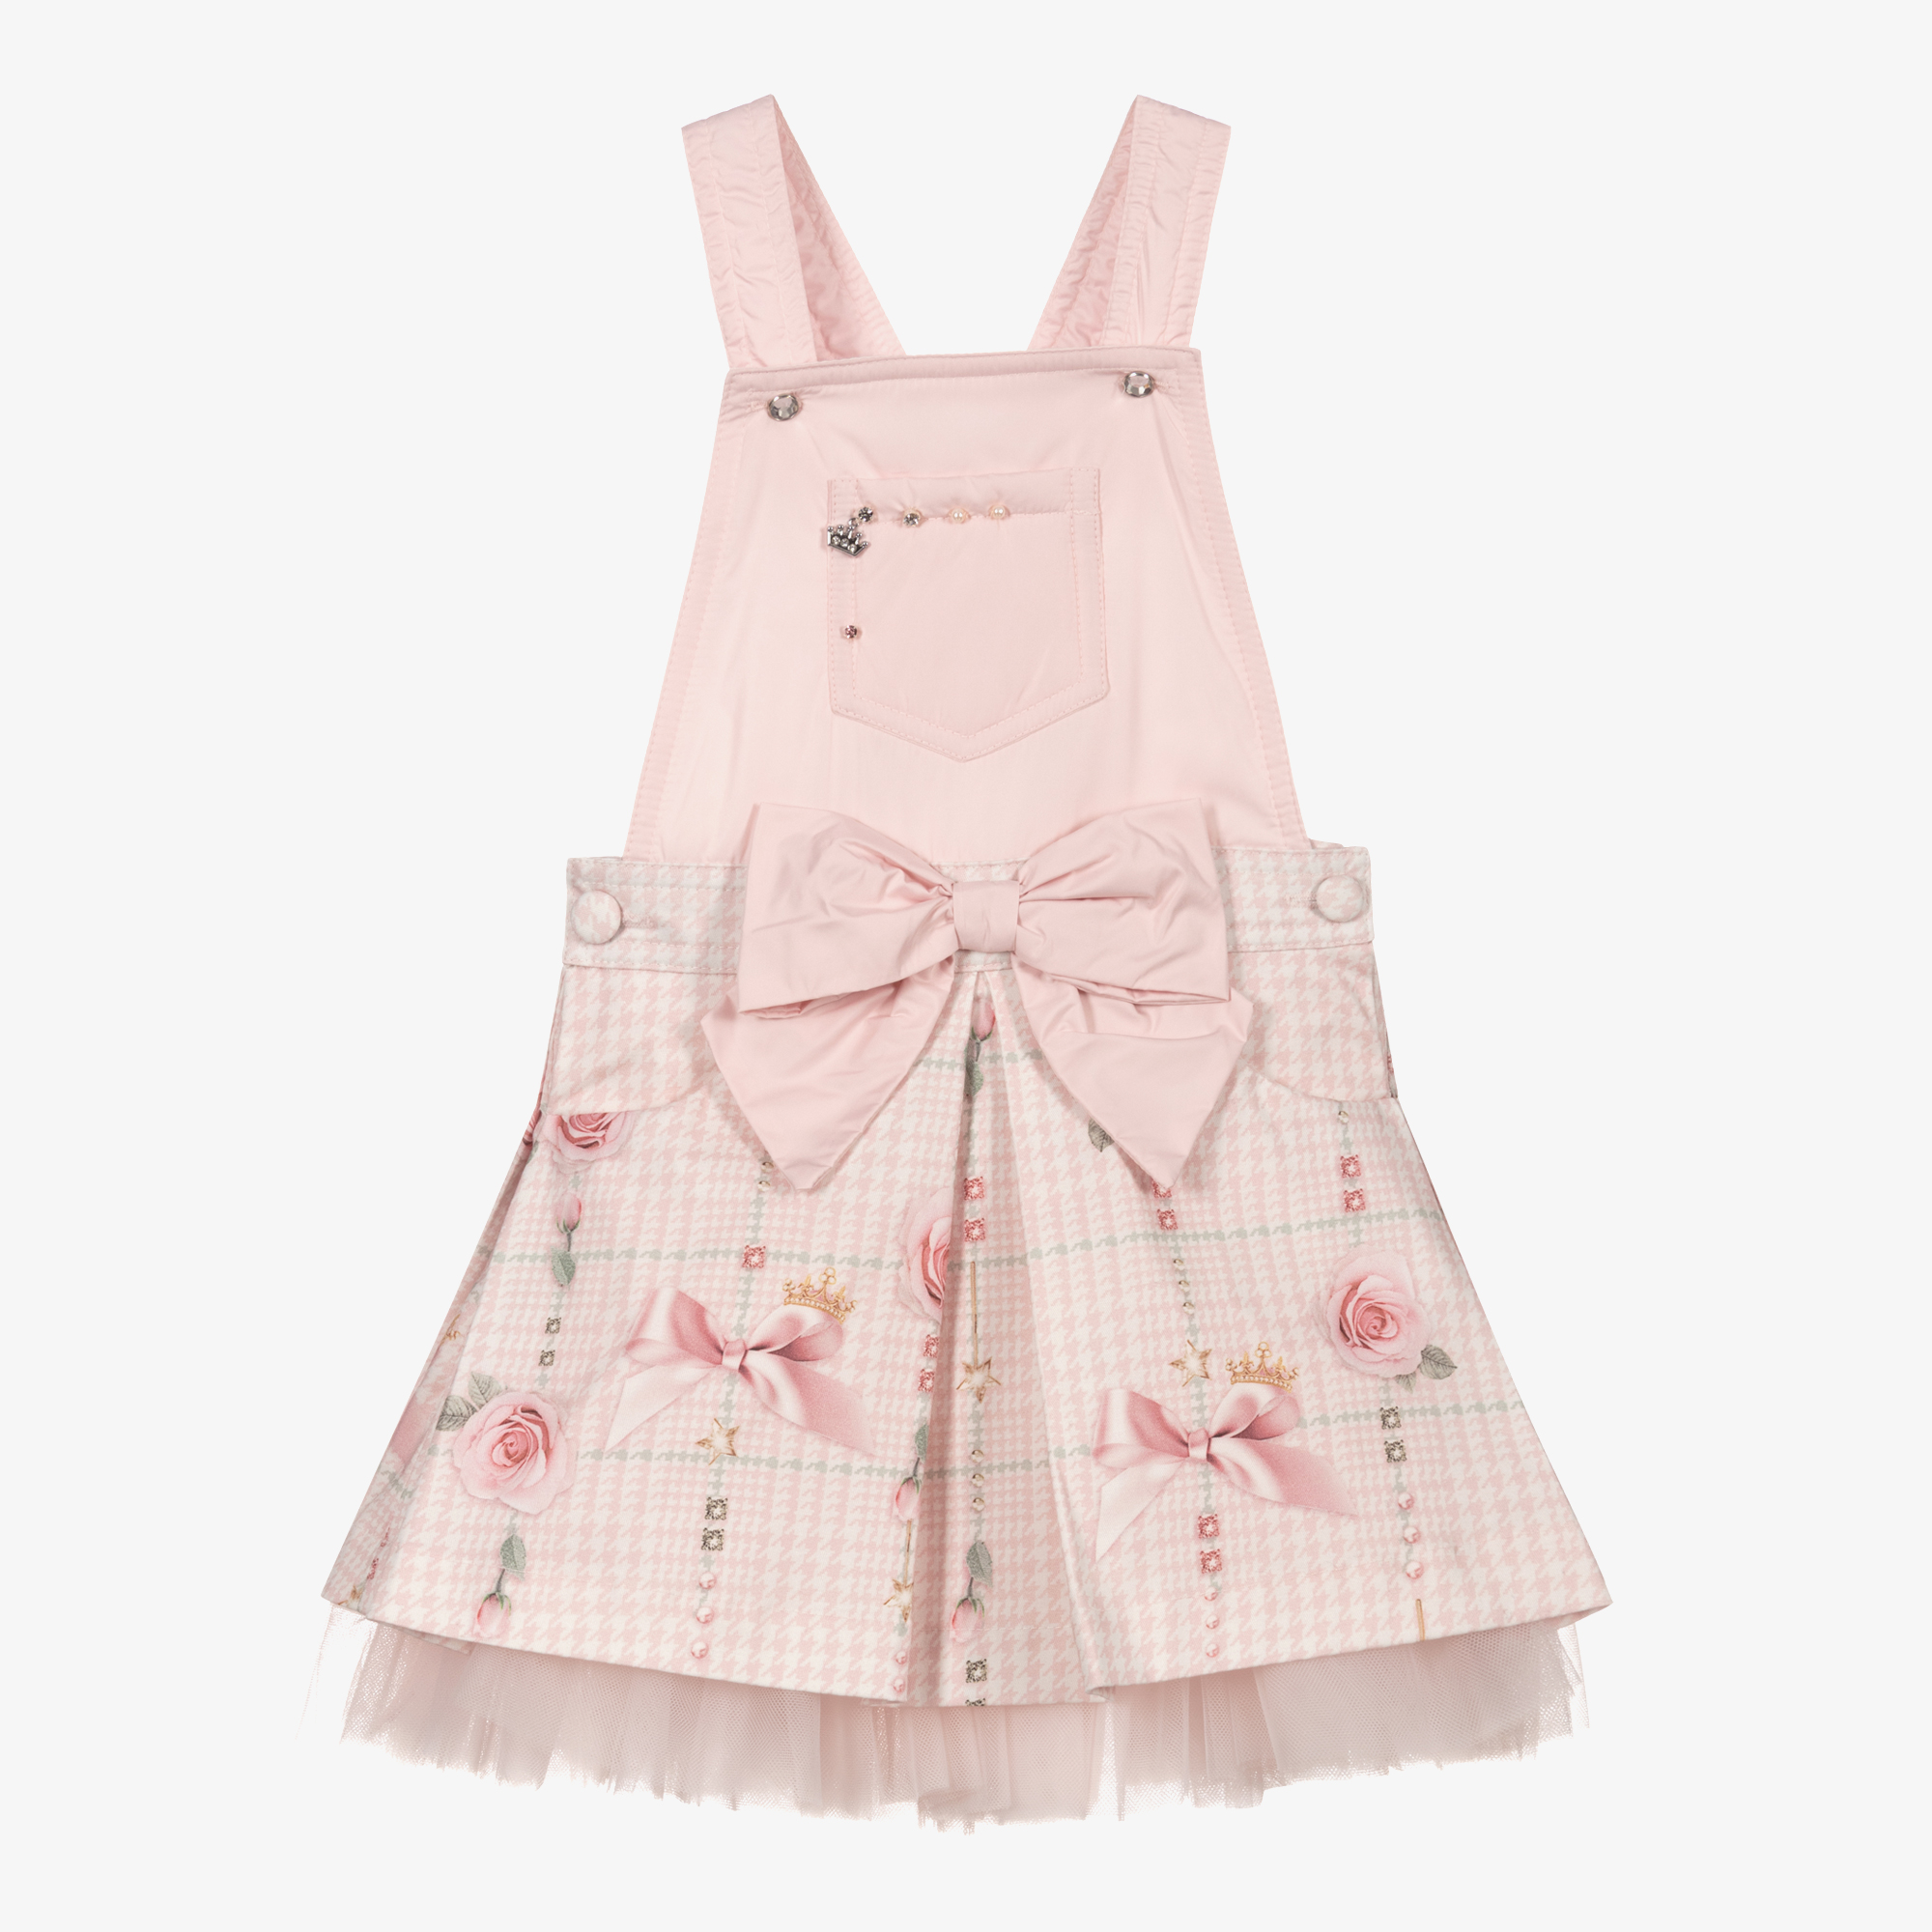 House - Girls Pink Pinafore | Childrensalon Outlet